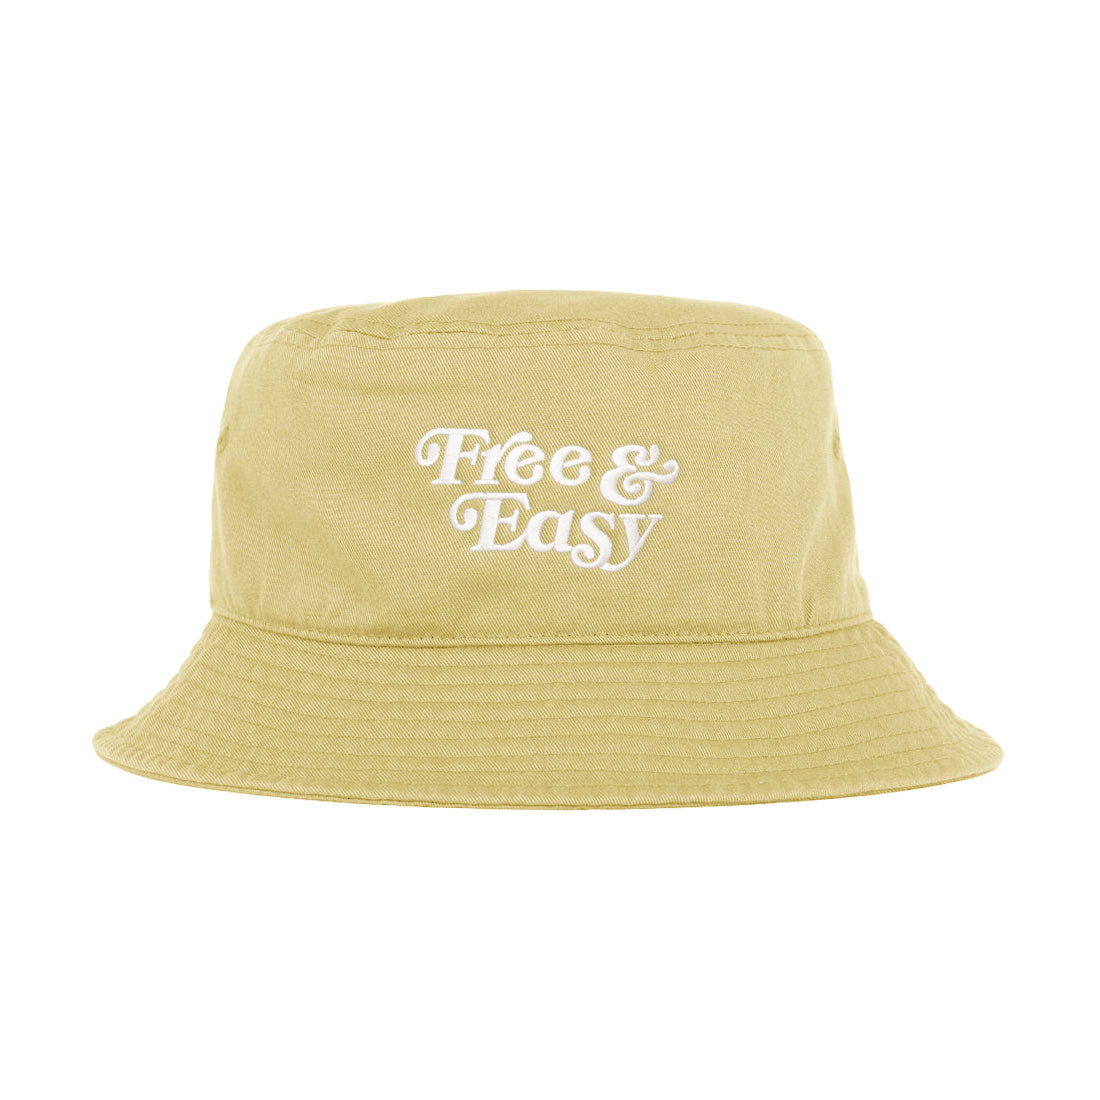 Free & Easy Don't Trip Bucket Hat in light yellow with white Free & Easy embroidery on a white background -Free & Easy